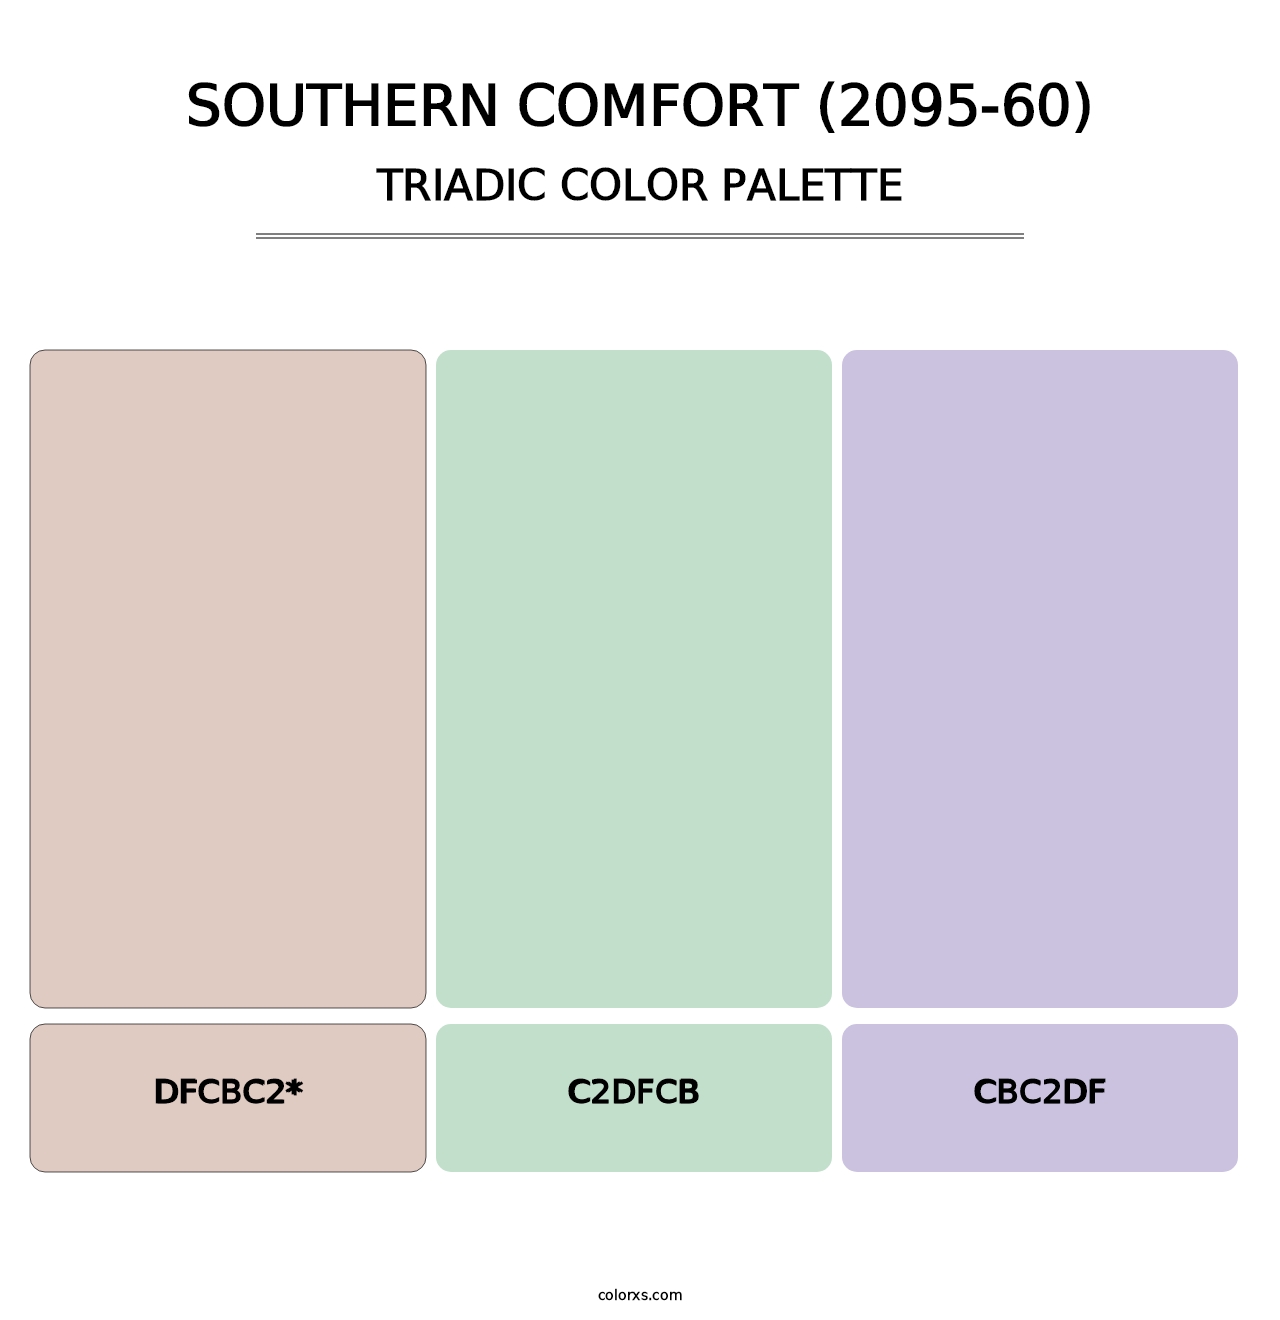 Southern Comfort (2095-60) - Triadic Color Palette